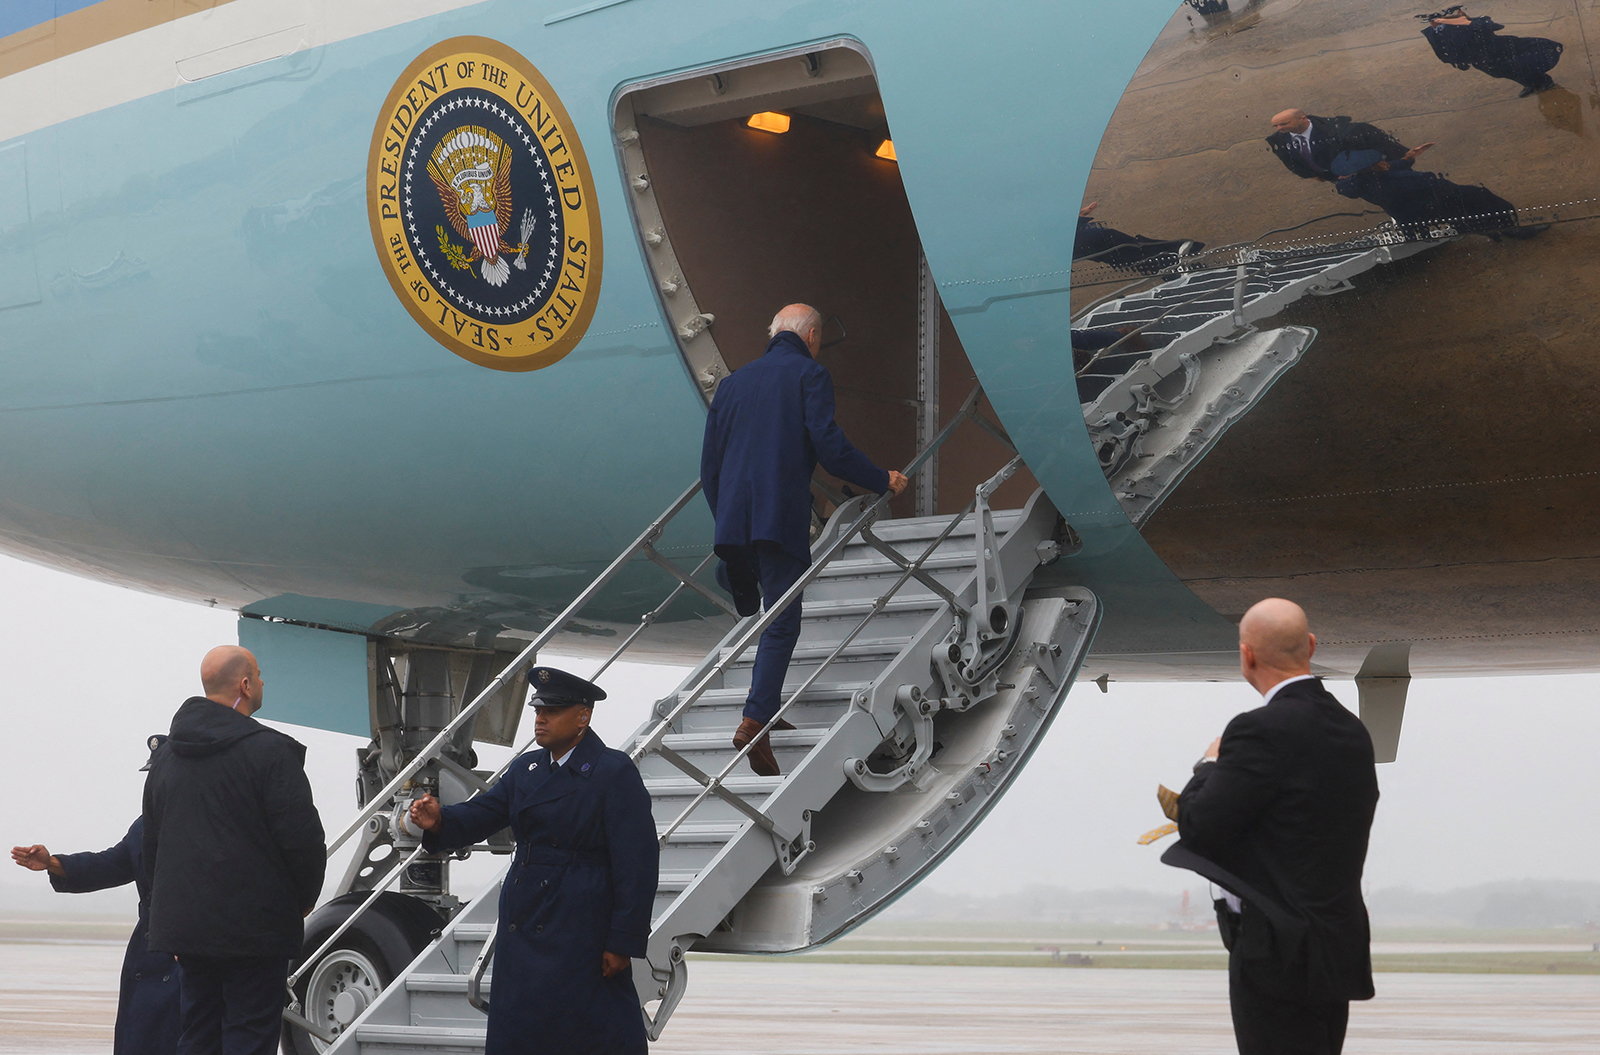 U.S. President Joe Biden boards Air Force One as he departs Joint Base Andrews for Michigan where he will join striking members of the United Auto Workers on the picket line, in Maryland, on September 26.